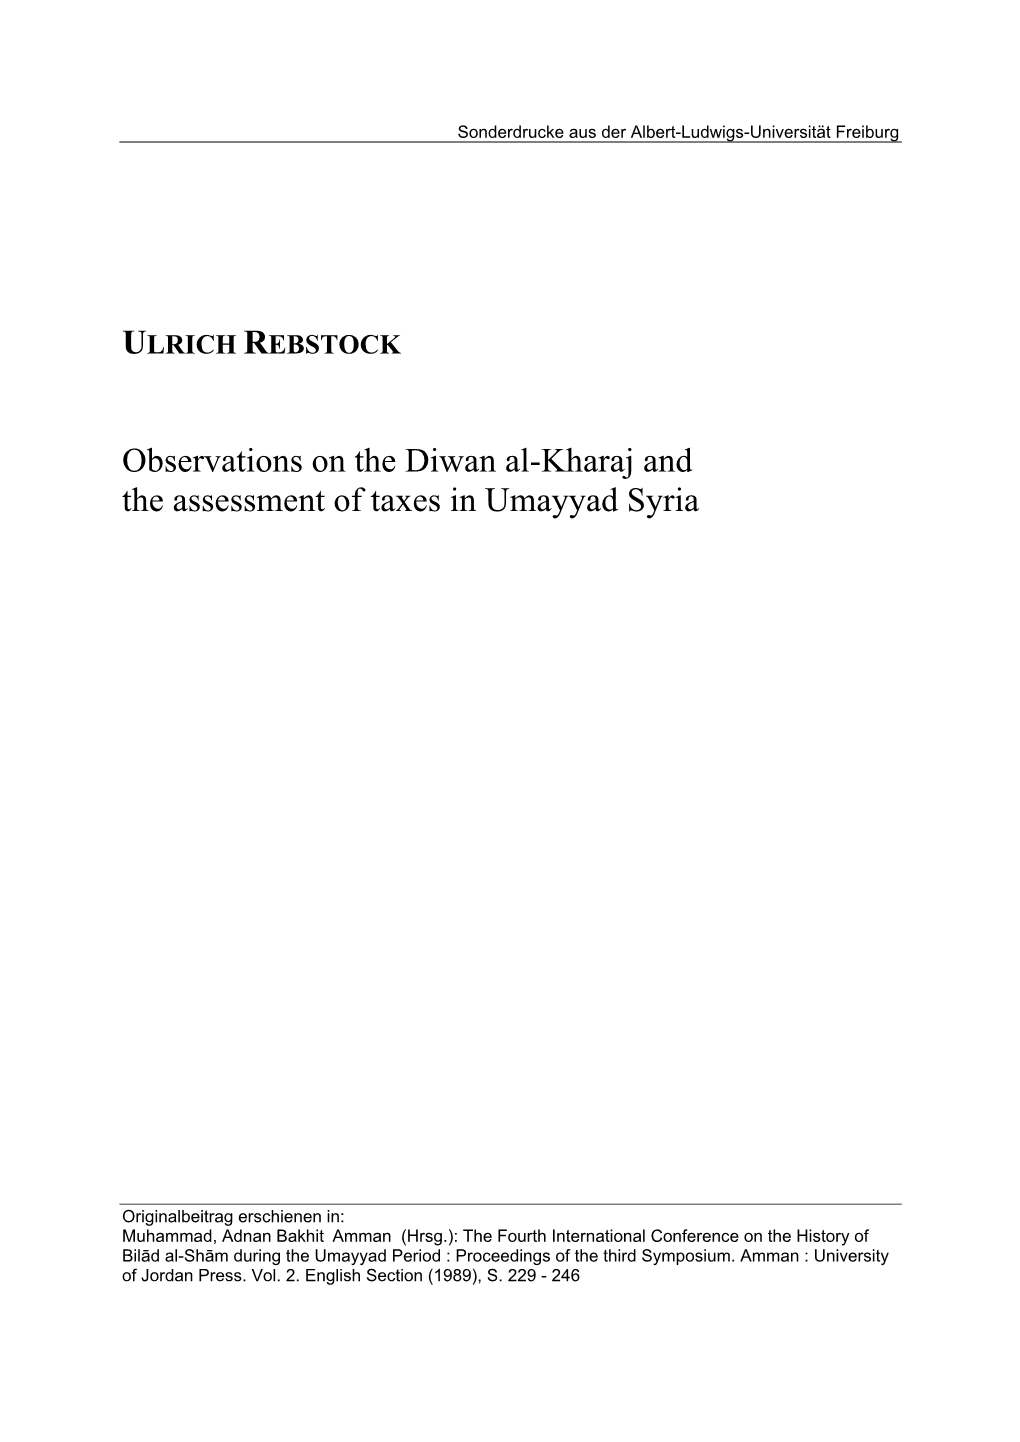 Observations on the Diwan Al-Kharaj and the Assessment of Taxes in Umayyad Syria